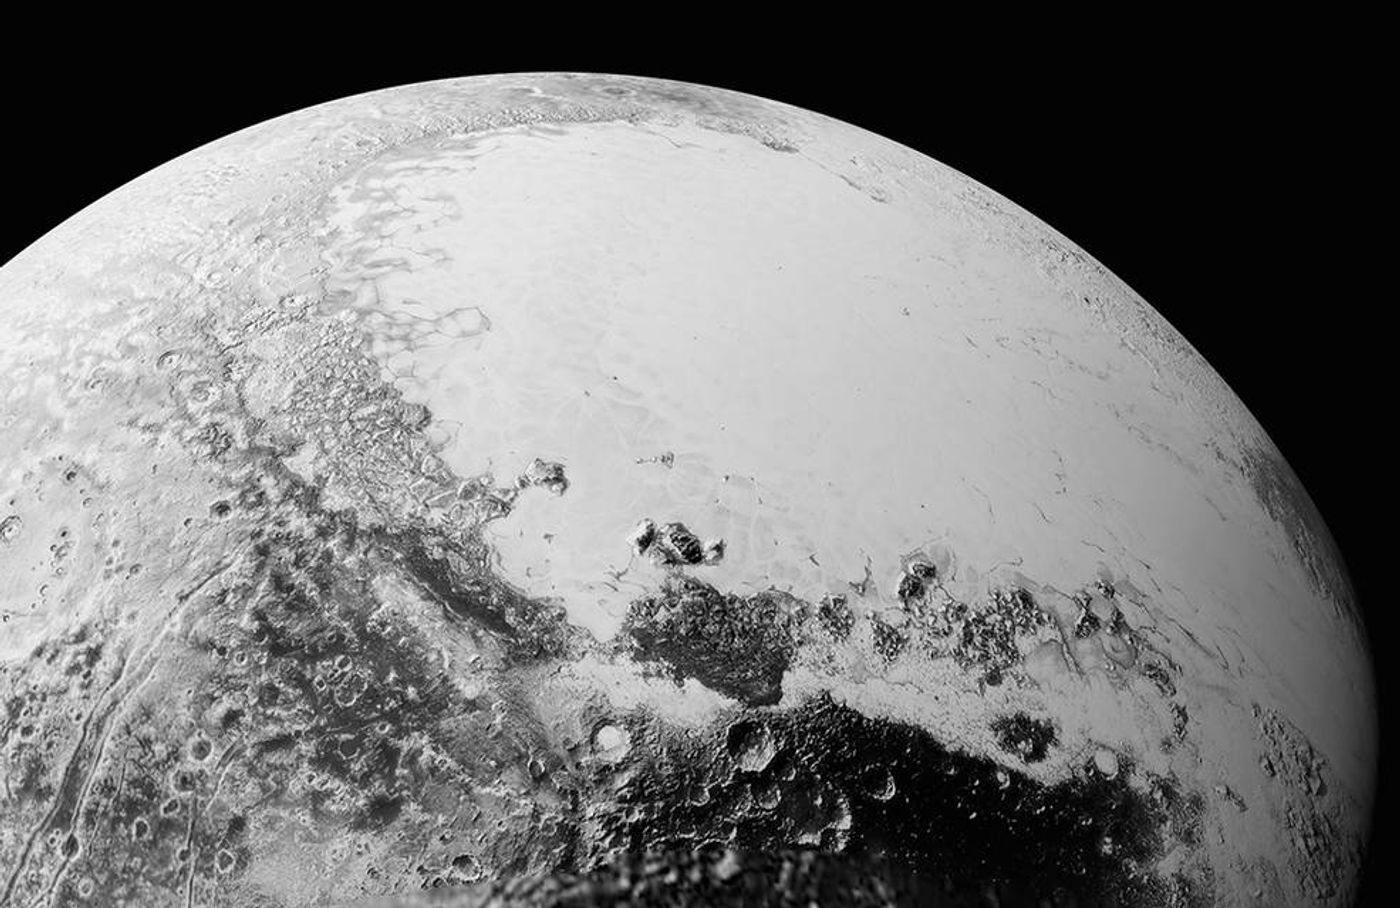 New Horizons has sent back more high detail photographs of Pluto's surface.